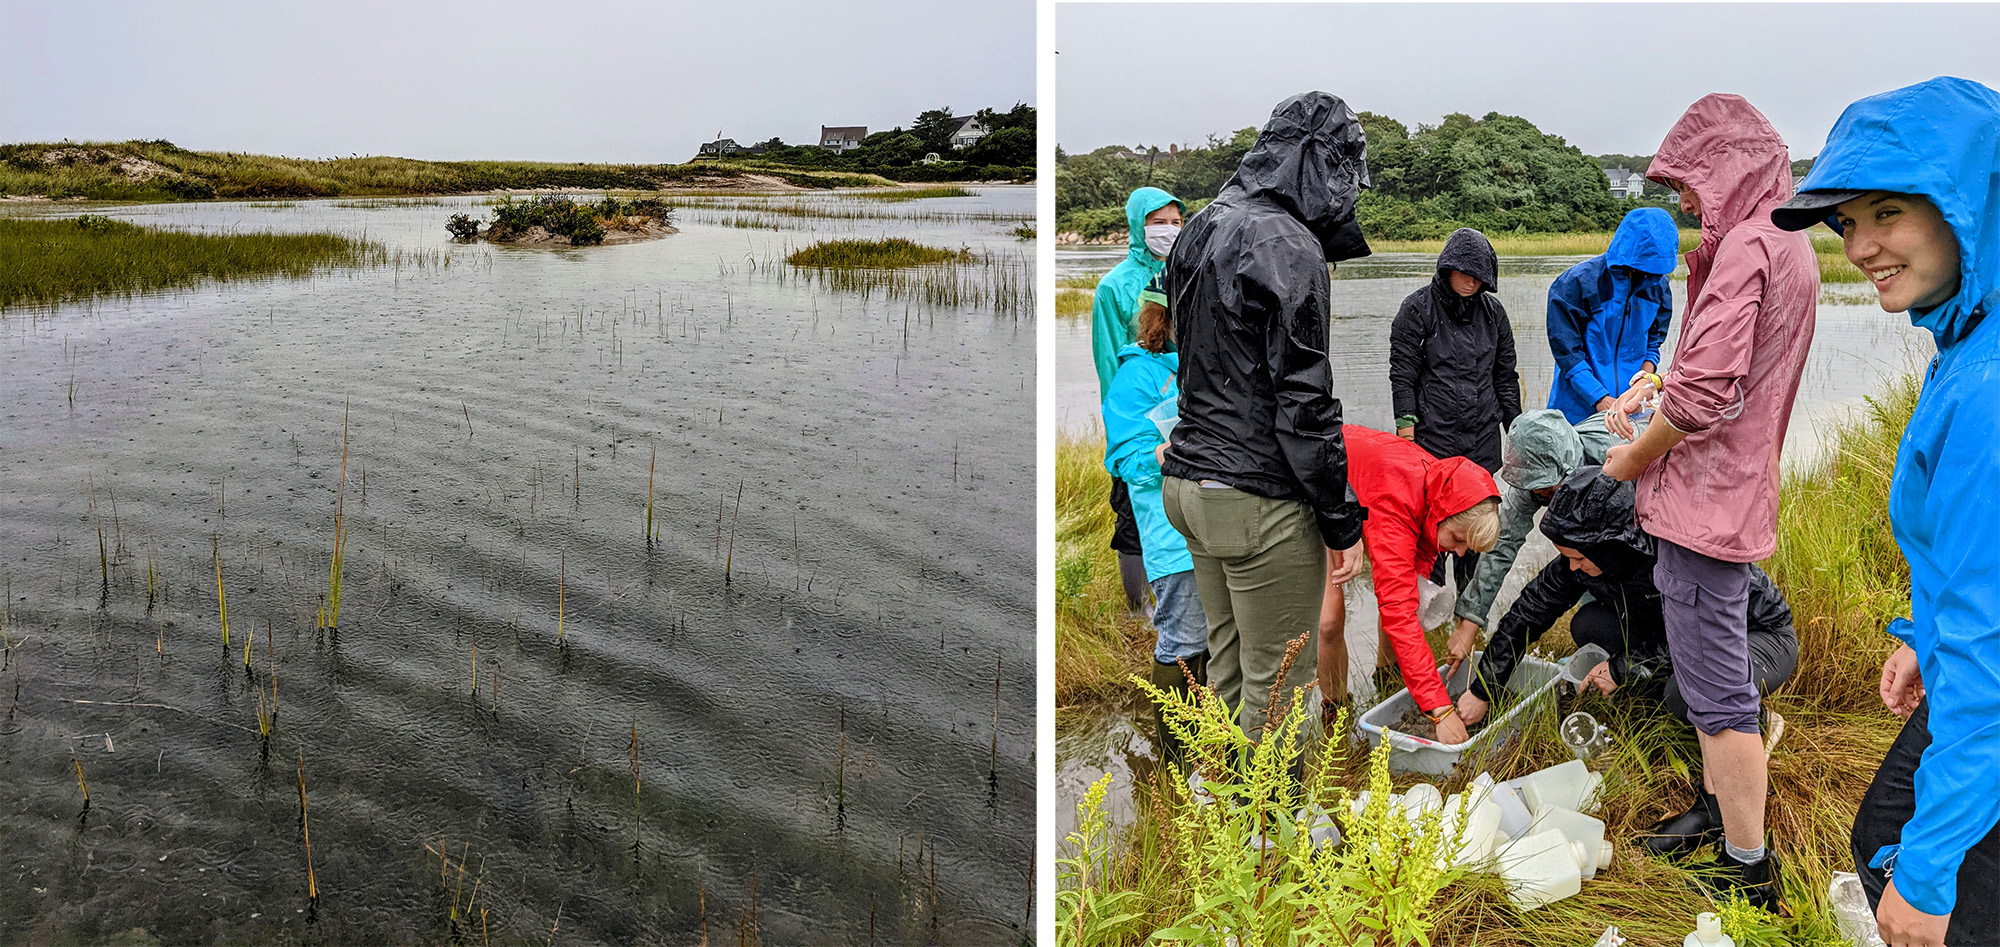 A rainy marsh on left and students in rain gear collecting samples in the marsh on right